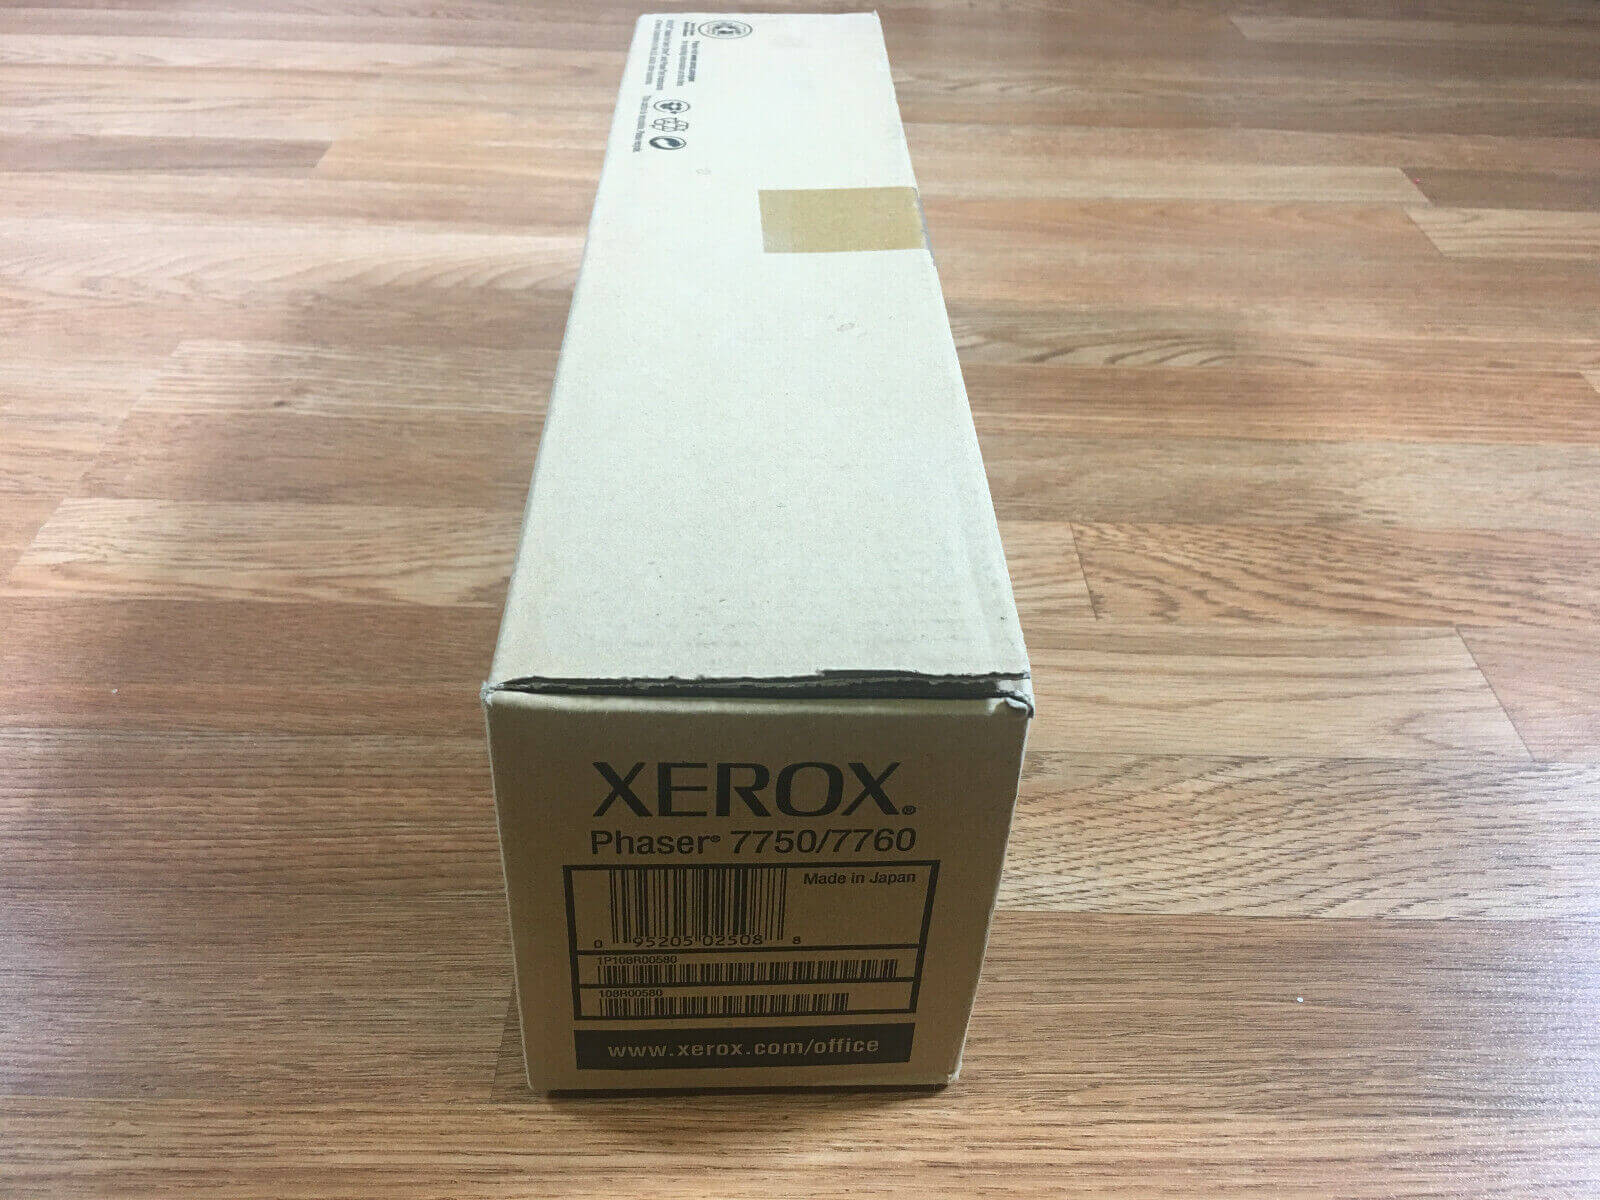 Genuine Xerox Phaser 7750 7760 Belt Cleaner Assembly 108R00580 Same Day Shipping - copier-clearance-center